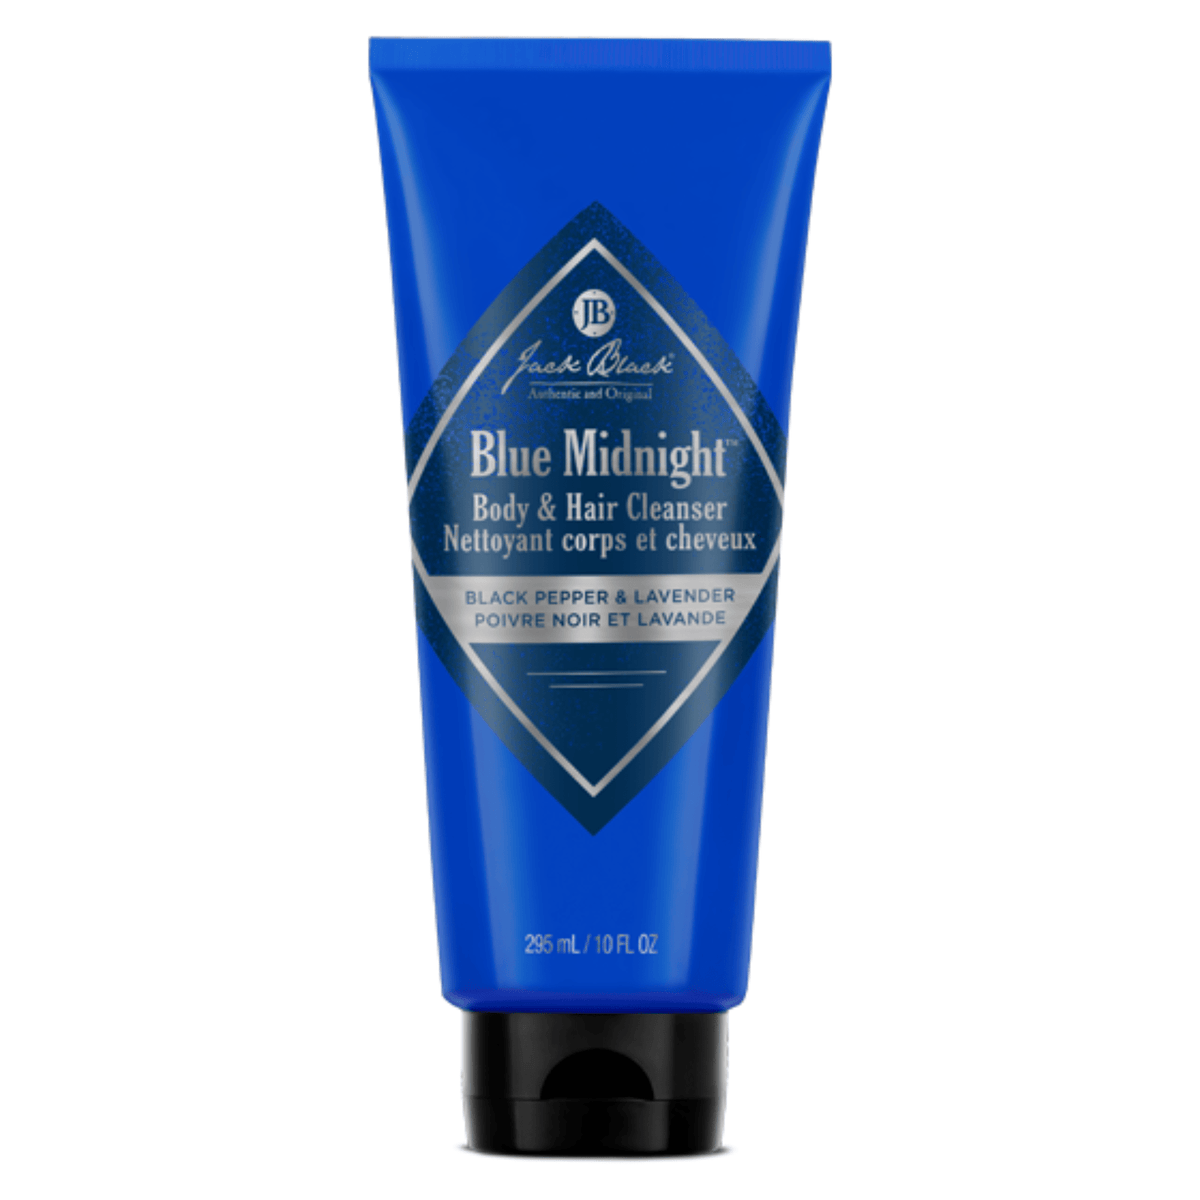 Primary Image of Blue Midnight Cleanser for Body & Hair